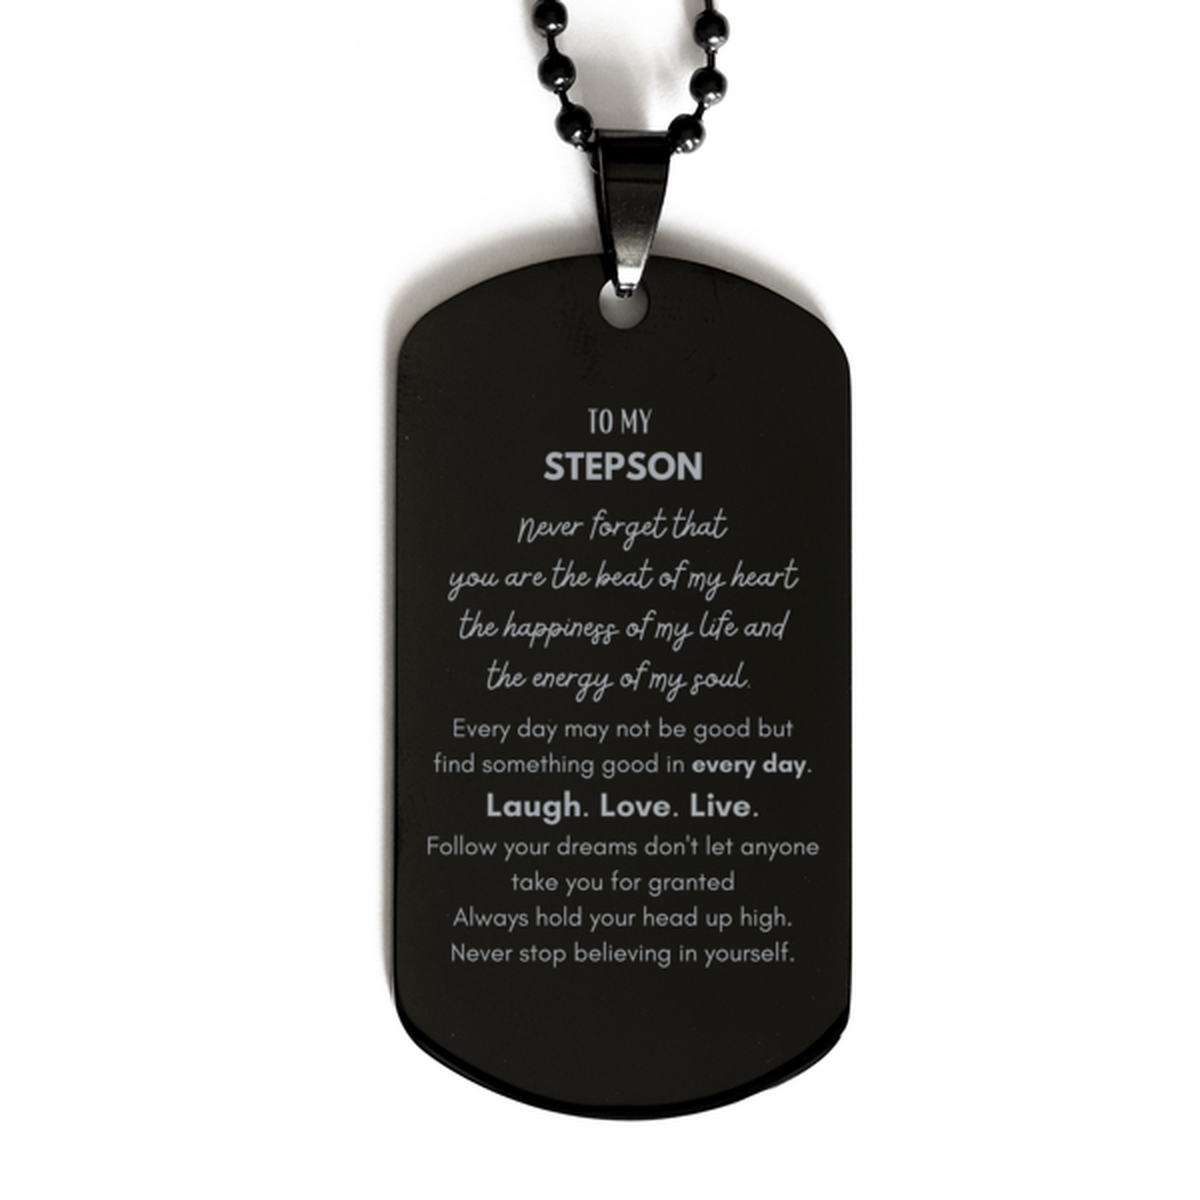 To My Stepson Dogtag Gifts, Christmas Stepson Black Dog Tag Present, Birthday Unique Motivational For Stepson, To My Stepson Never forget that you are the beat of my heart the happiness of my life and the energy of my soul